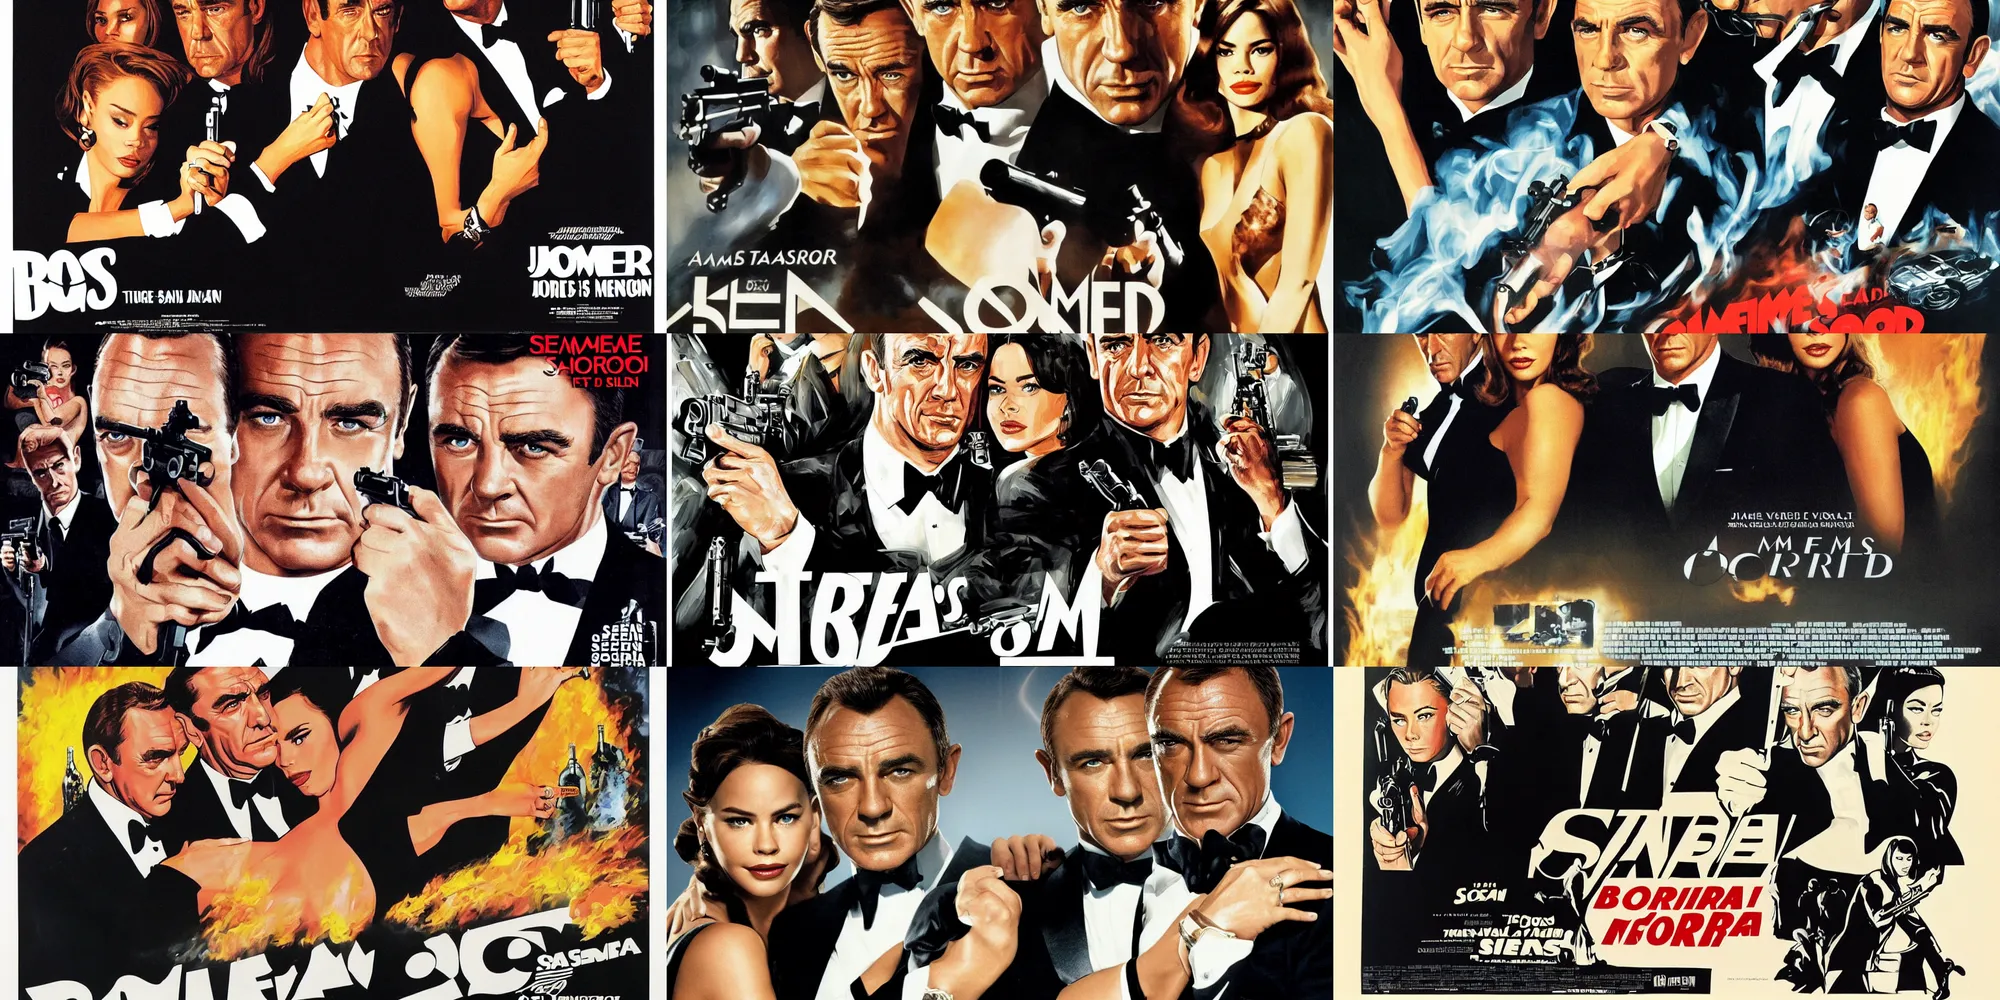 Prompt: james bond movie poster, starring sean connery and sofia vergara